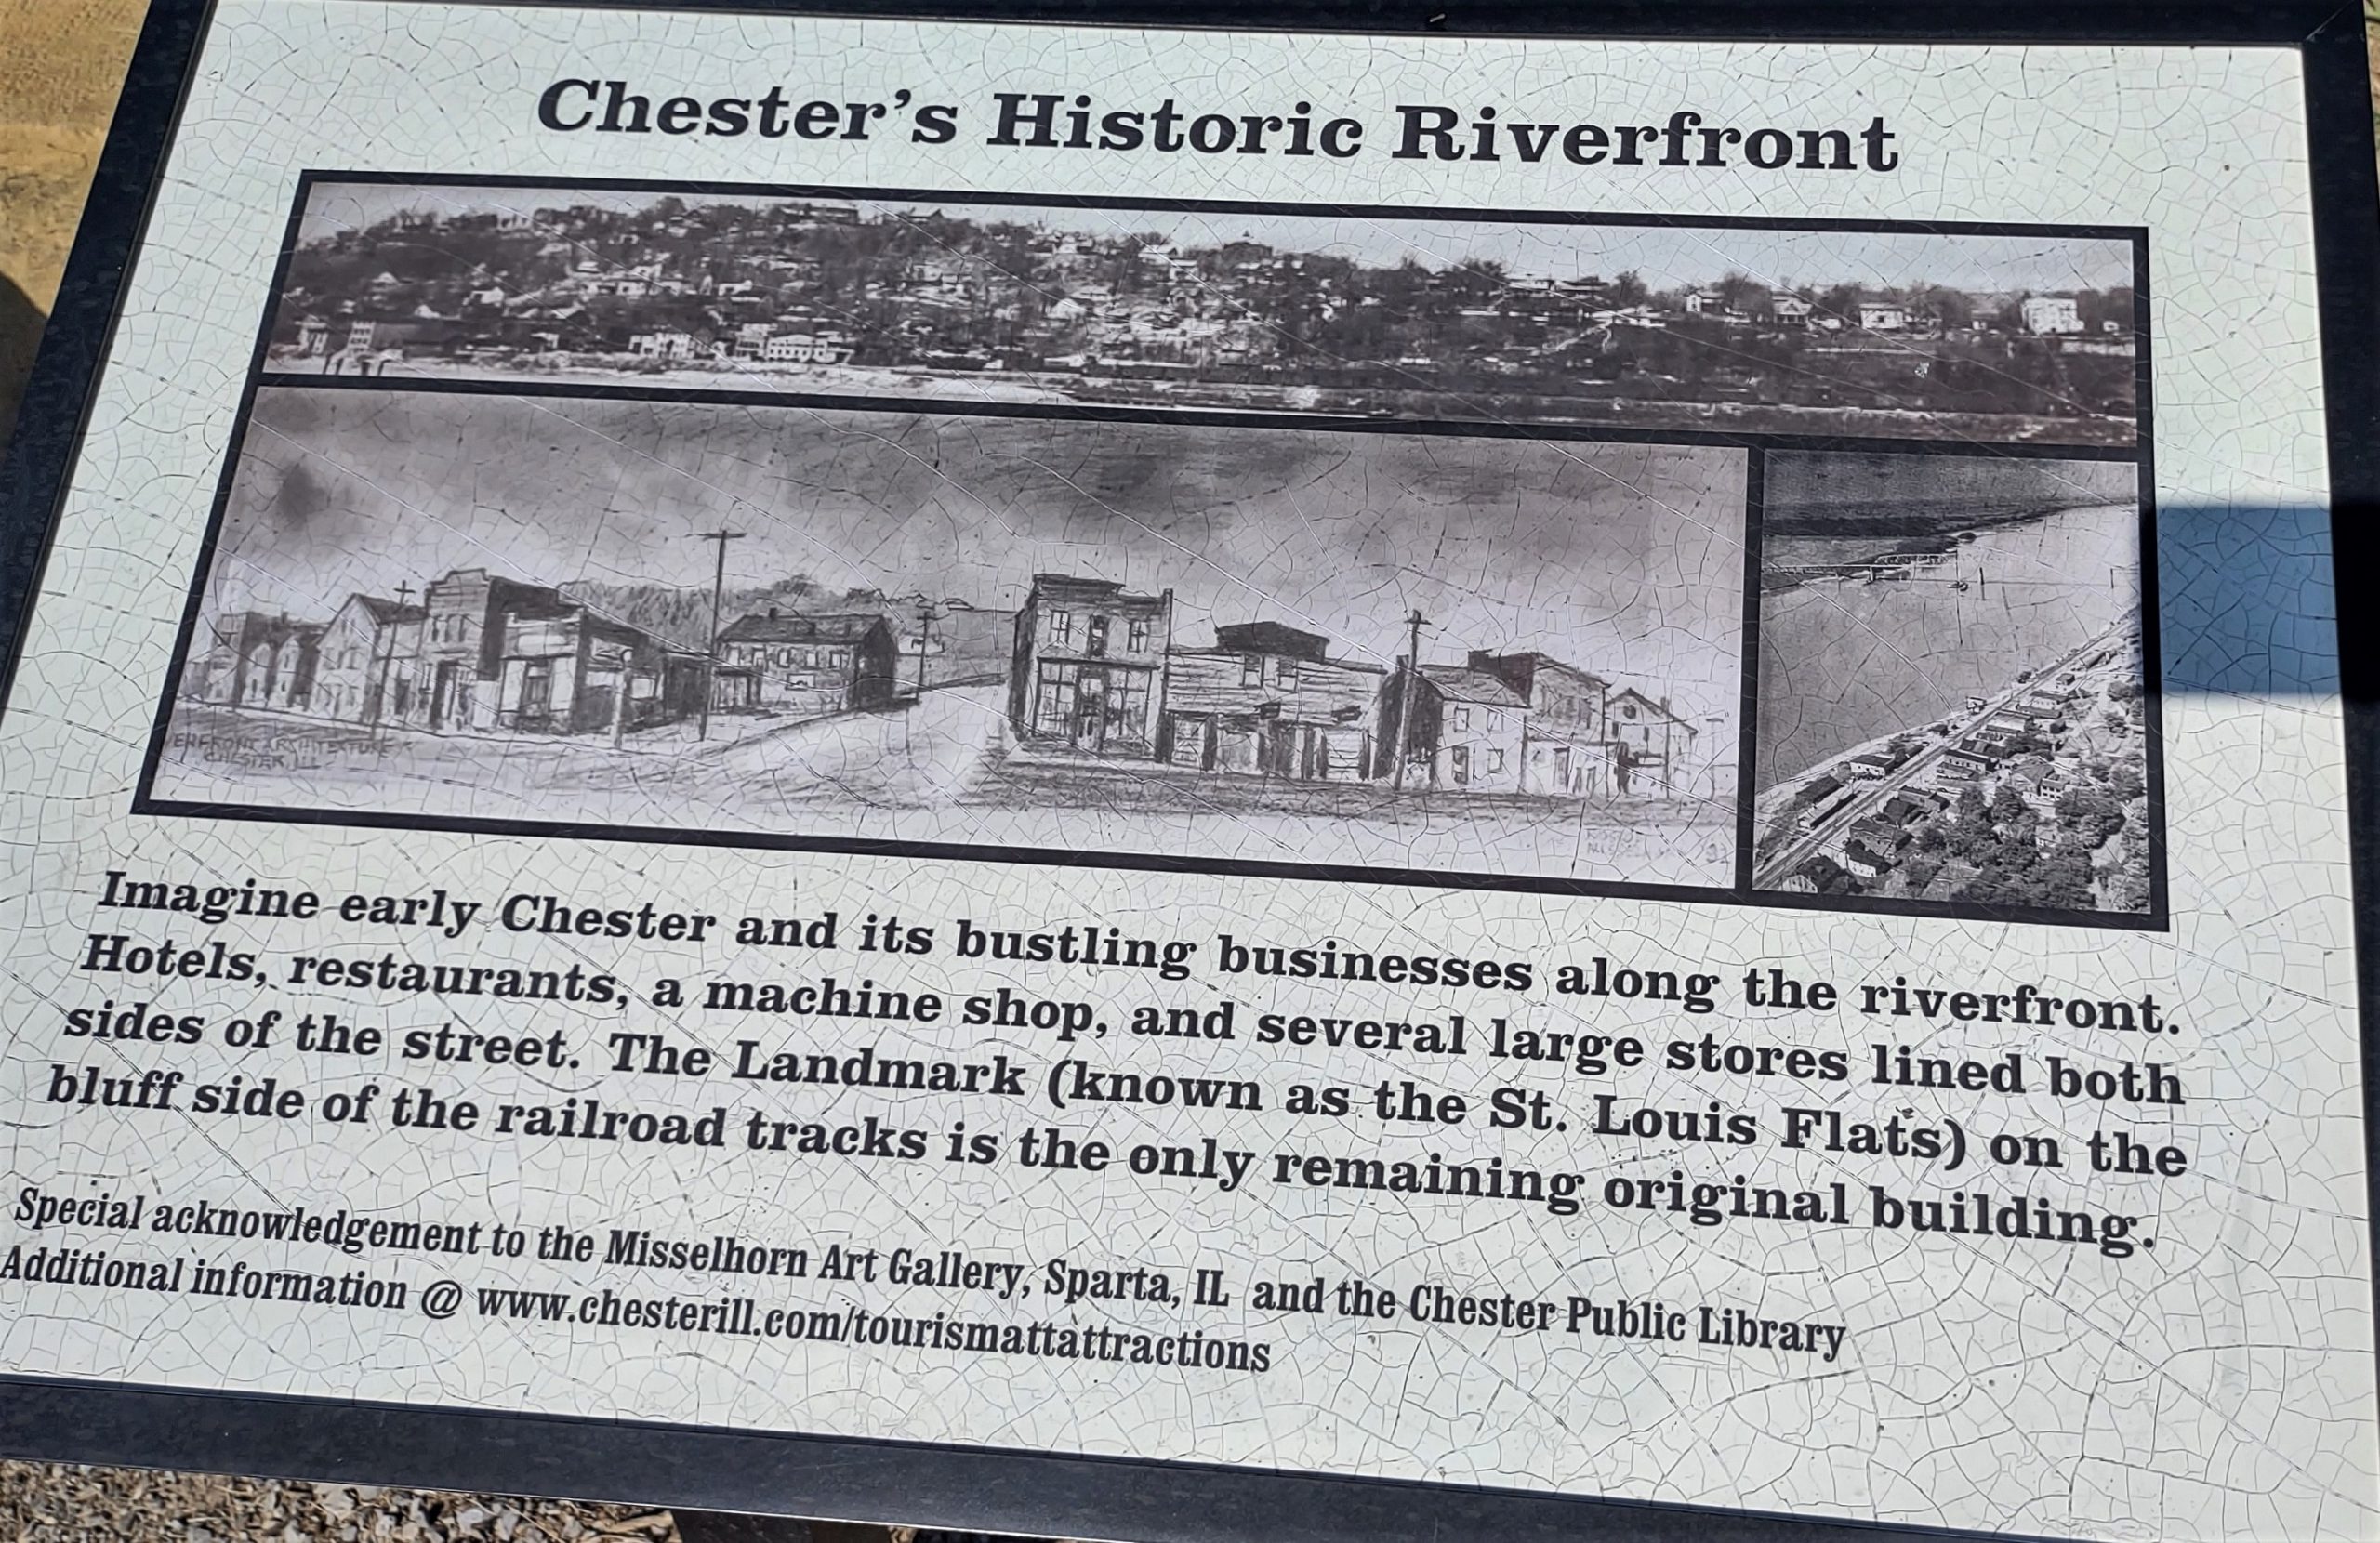 Photograph of interpretive sign at Port of Chester, Illinois.